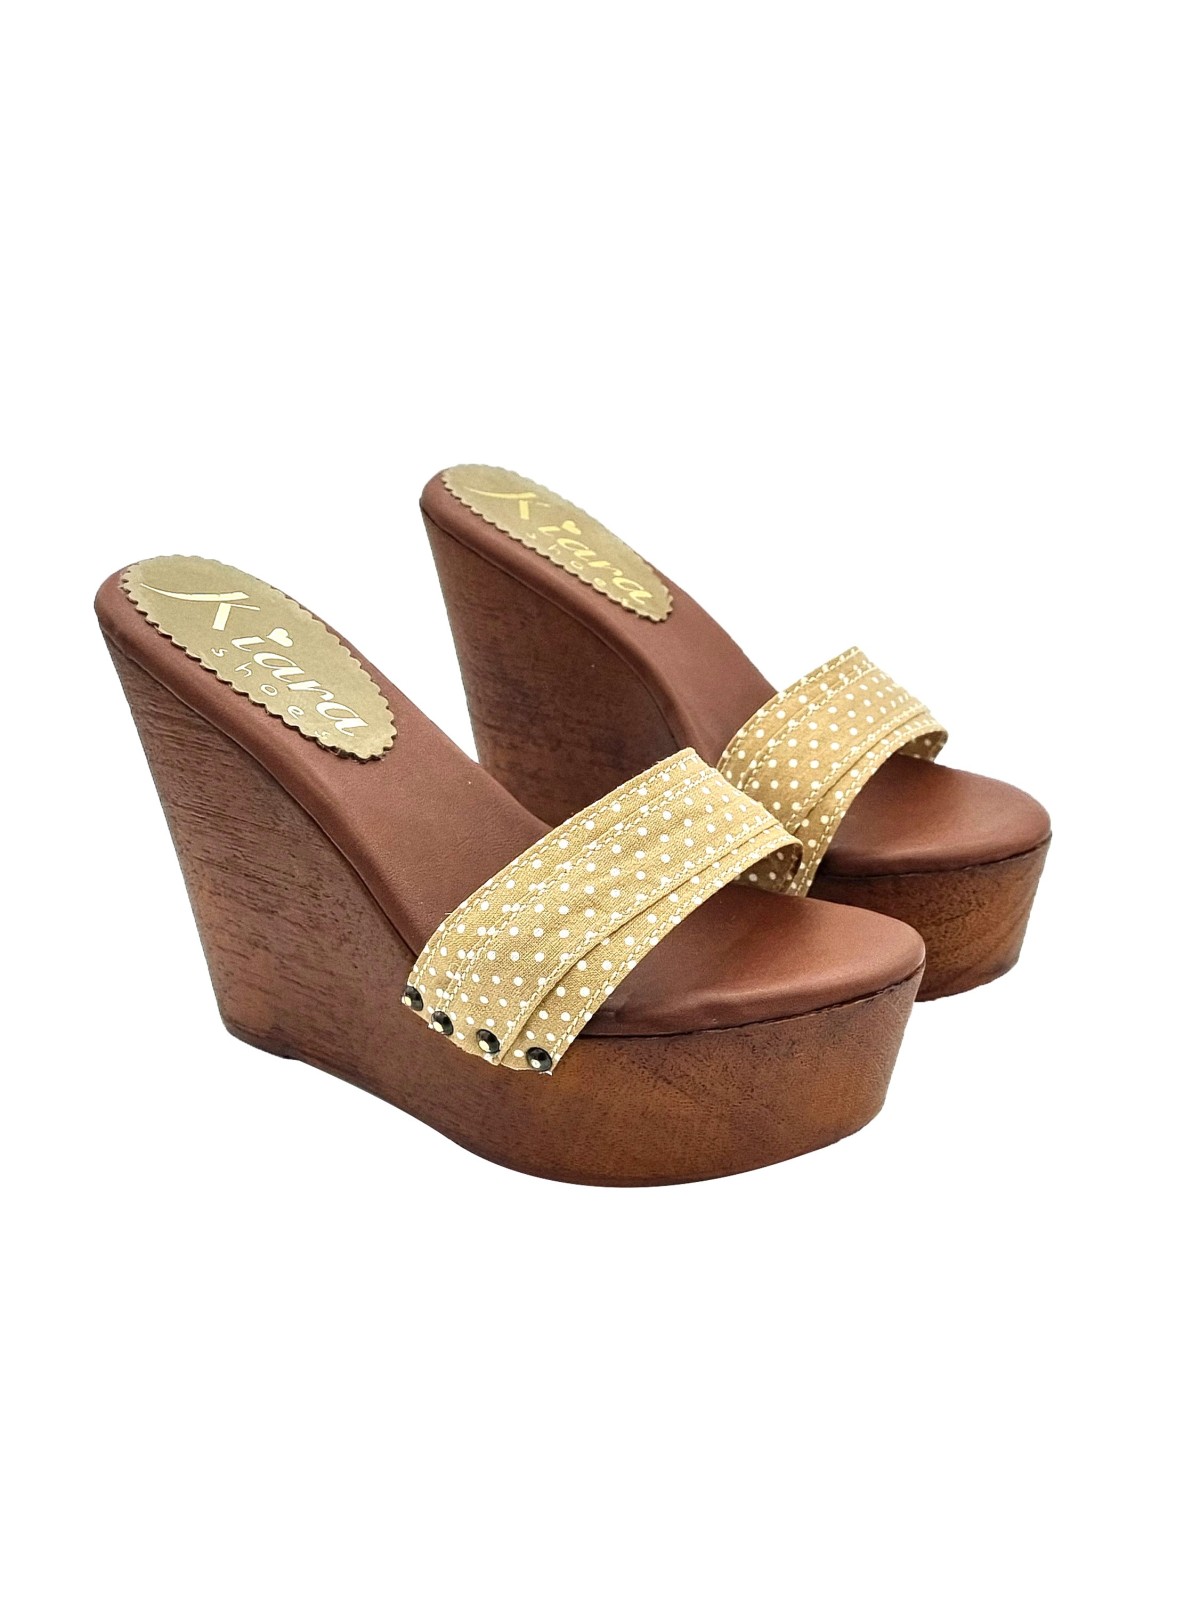 WOMEN'S WEDGES COLOR TAUPE WITH POLKA DOTS